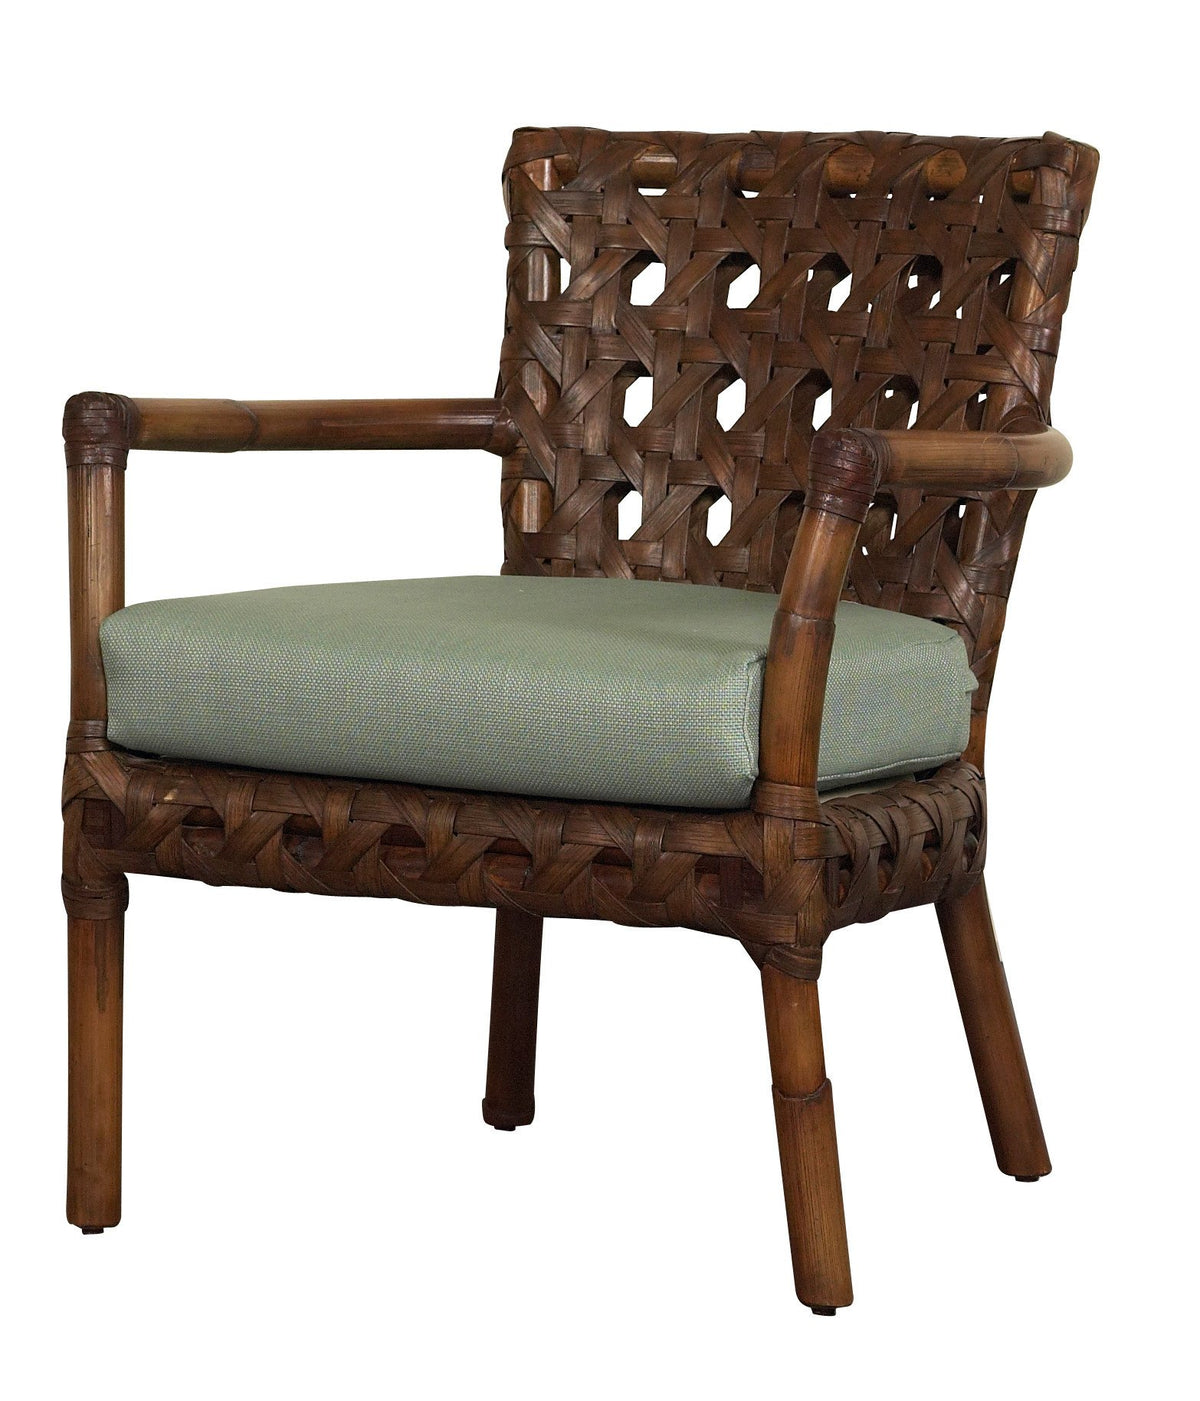 Designer Wicker &amp; Rattan By Tribor Morocco Occasional Chair by Designer Wicker from Tribor Chair - Rattan Imports